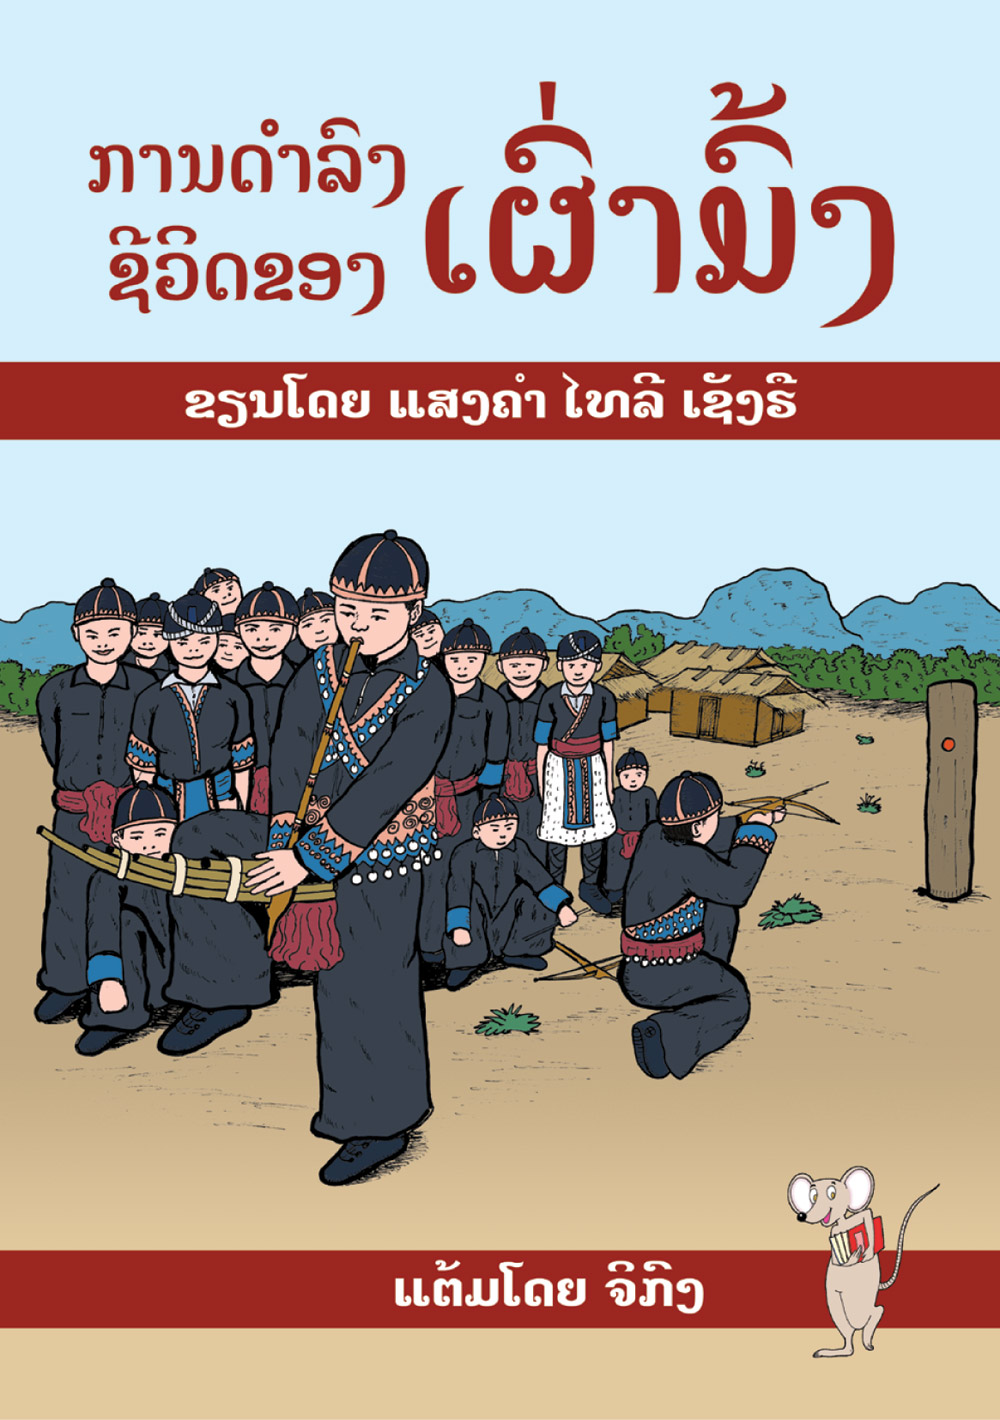 Hmong Life large book cover, published in Lao language